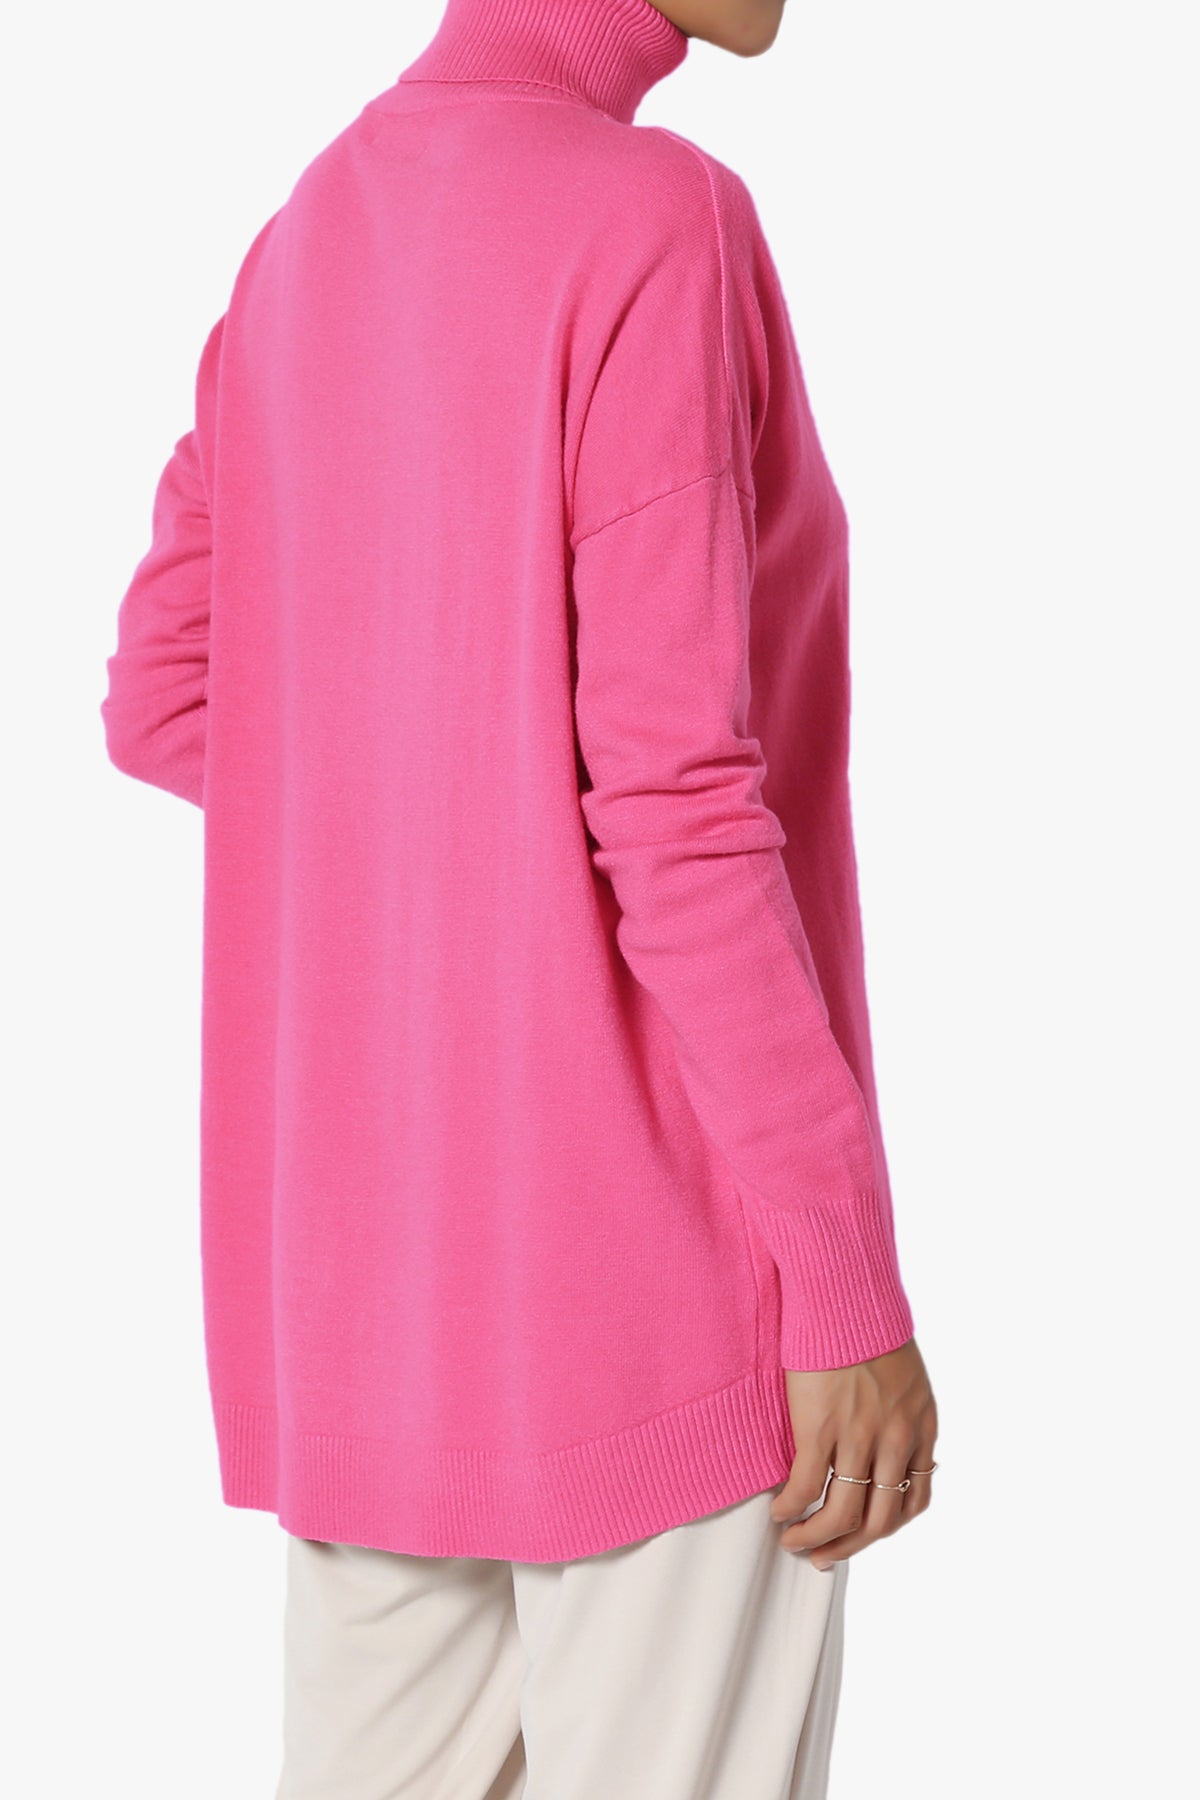 Henley Turtle Neck Knit Sweater HOT PINK_4